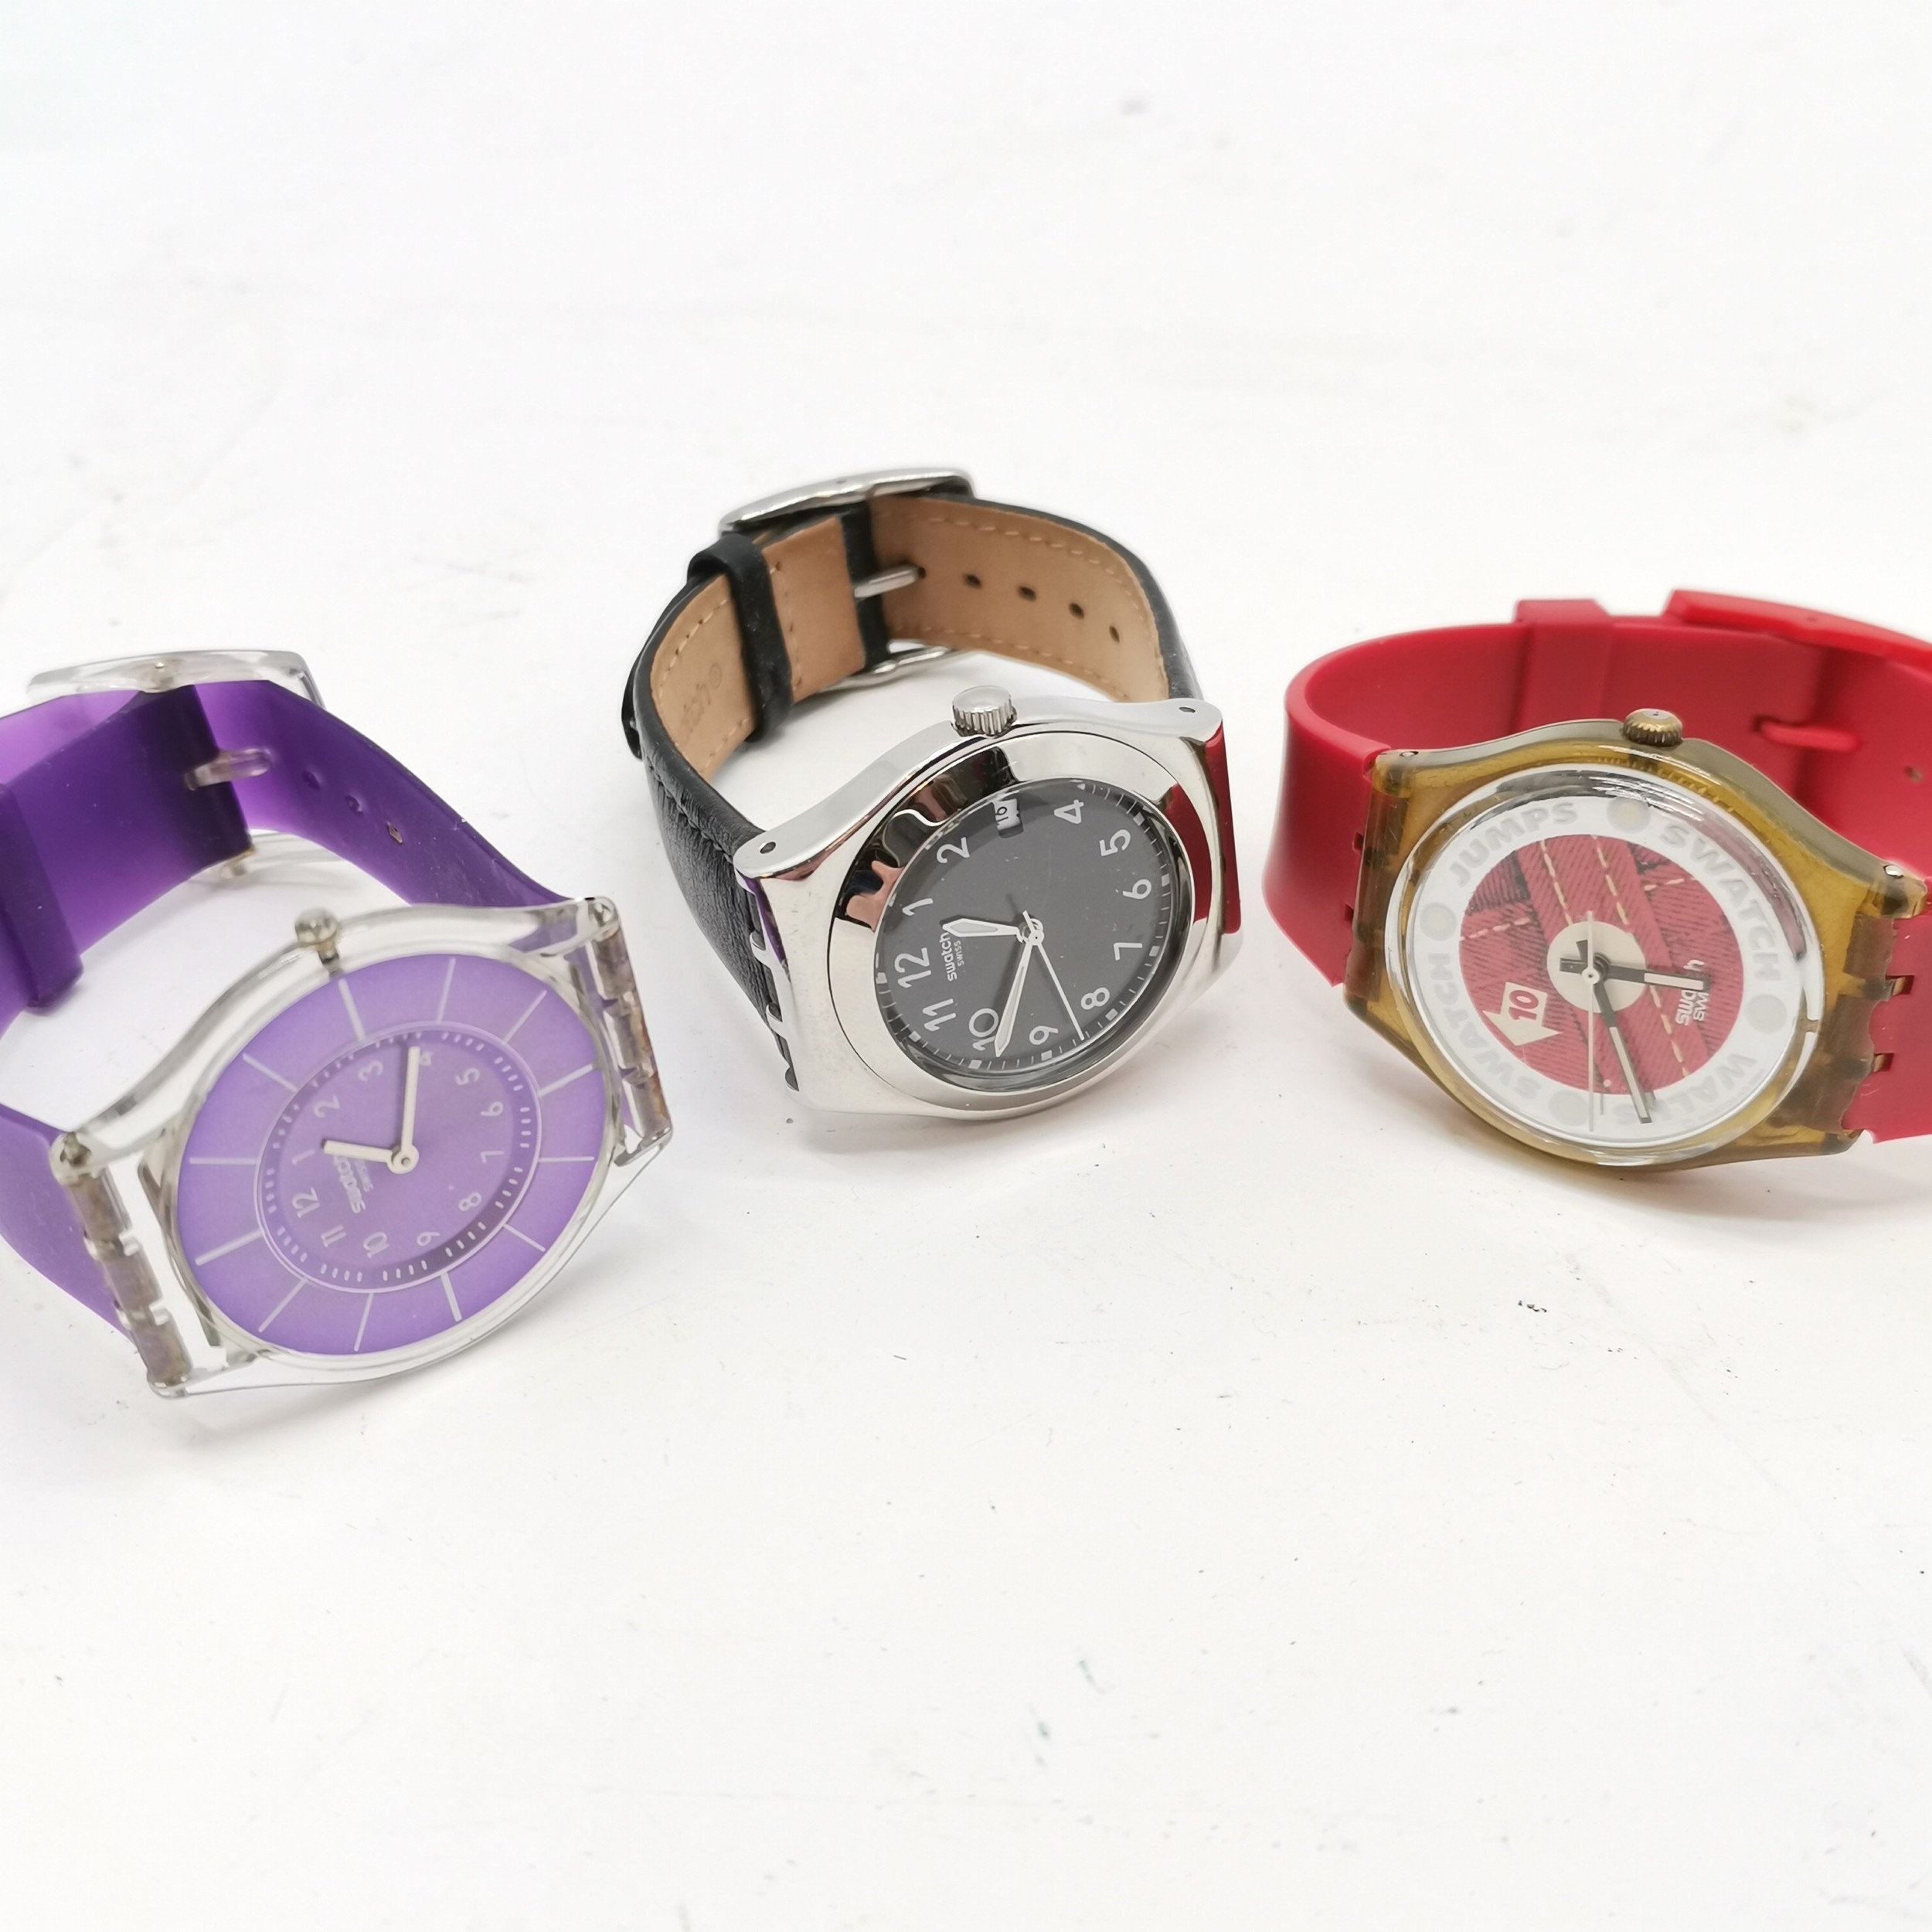 6 x Swatch wristwatches inc walks / jumps - Image 2 of 3